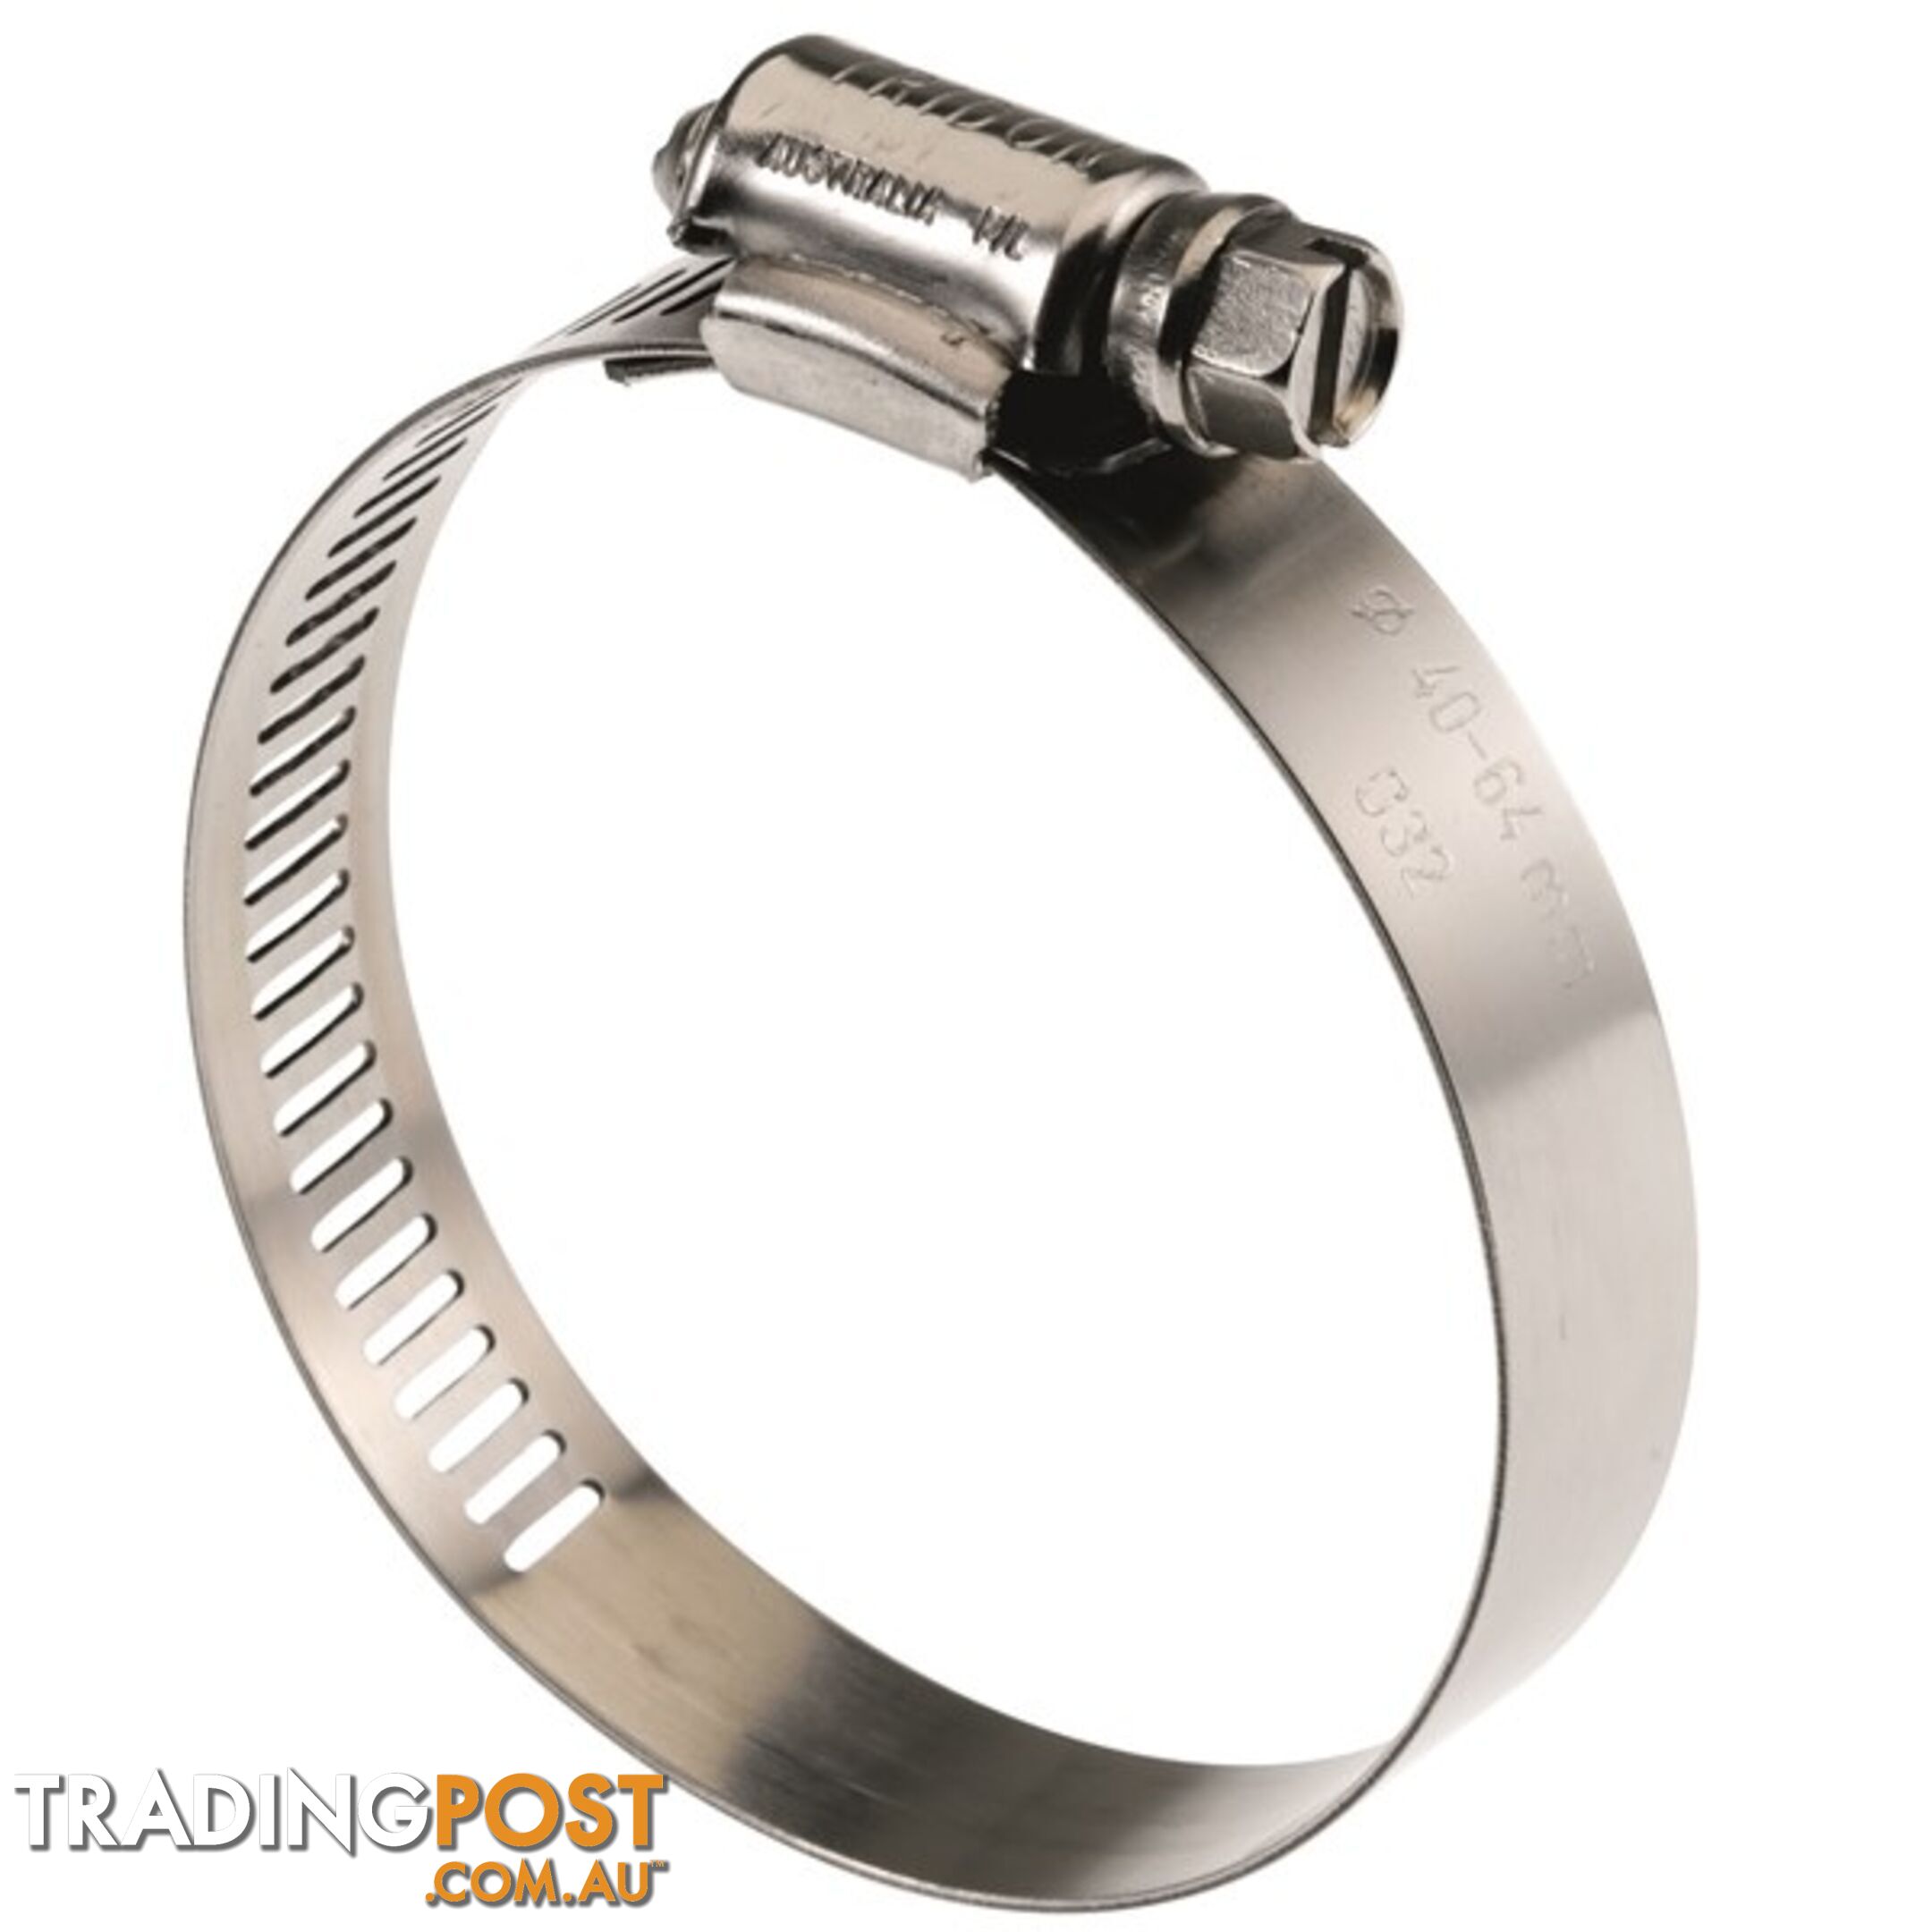 Tridon Full S. Steel Hose Clamps 11mm  - 22mm Perforated Band 10pk SKU - HAS006P